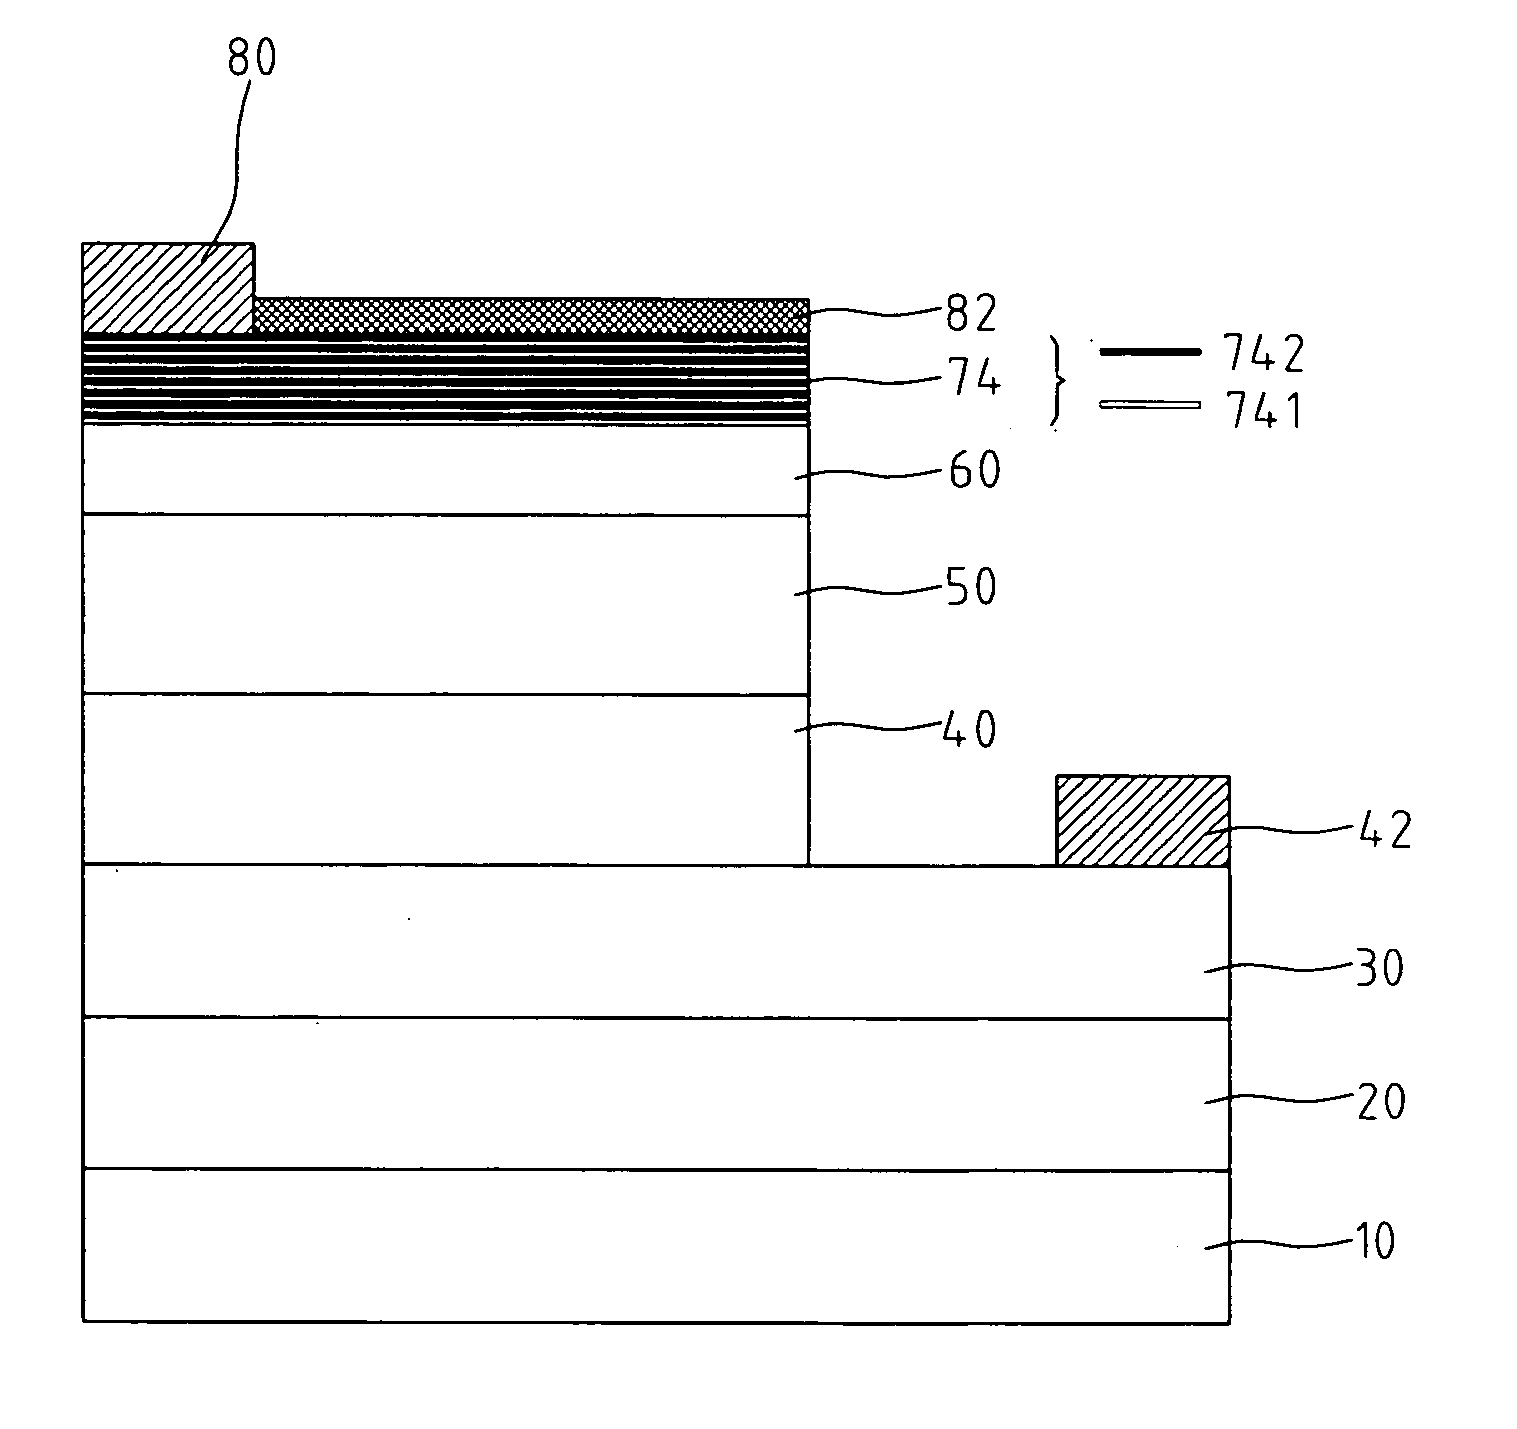 Gallium-nitride based light-emitting diodes structure with high reverse withstanding voltage and anti-ESD capability